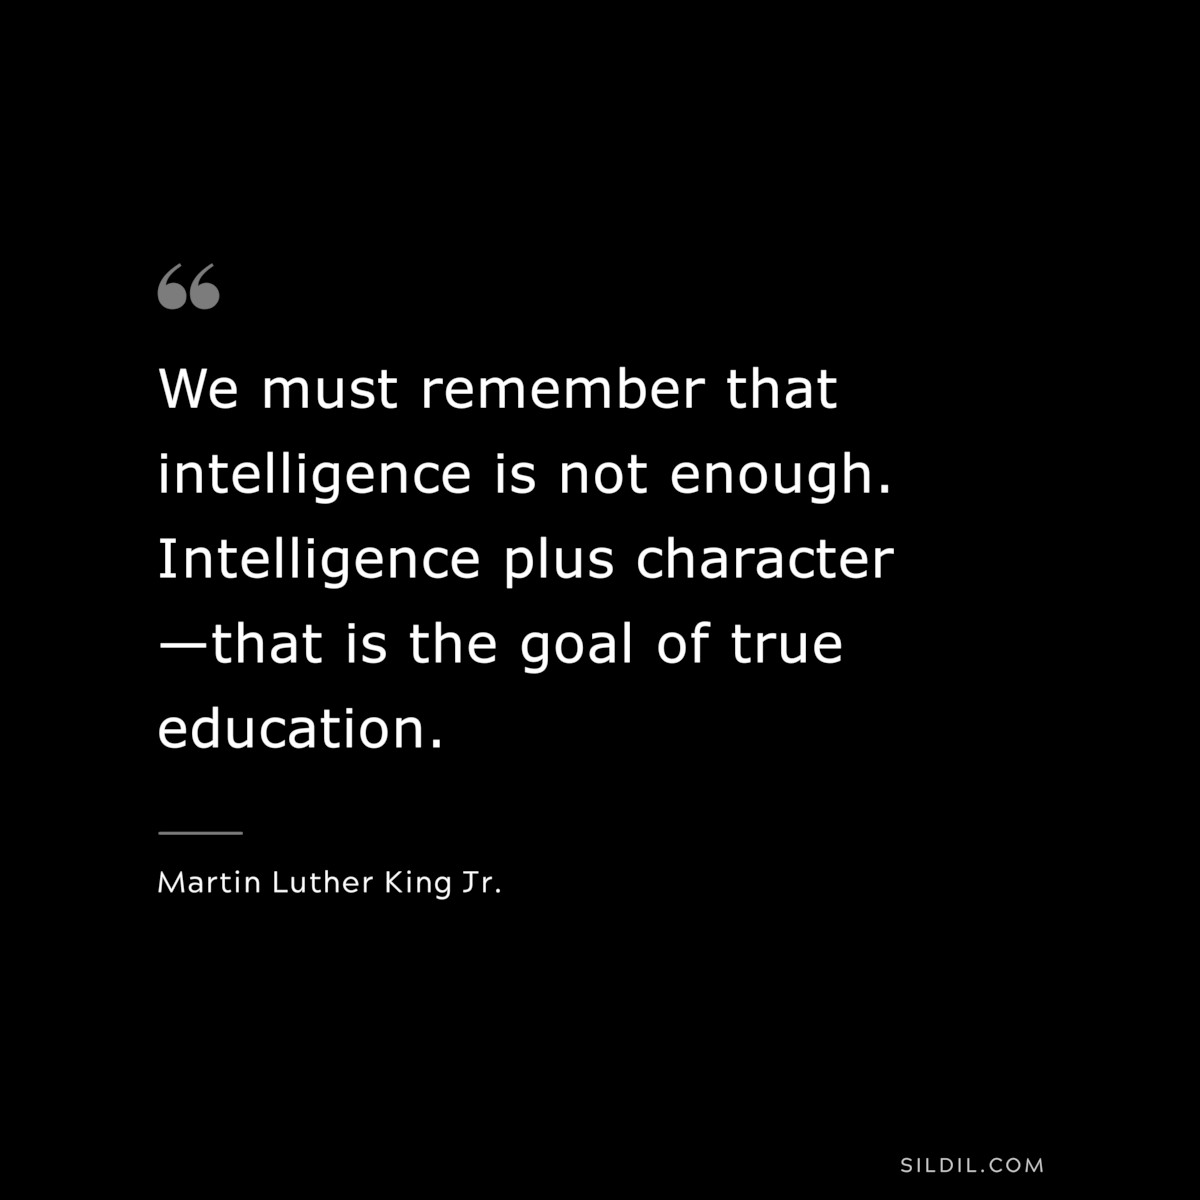 We must remember that intelligence is not enough. Intelligence plus character—that is the goal of true education. ― Martin Luther King Jr.